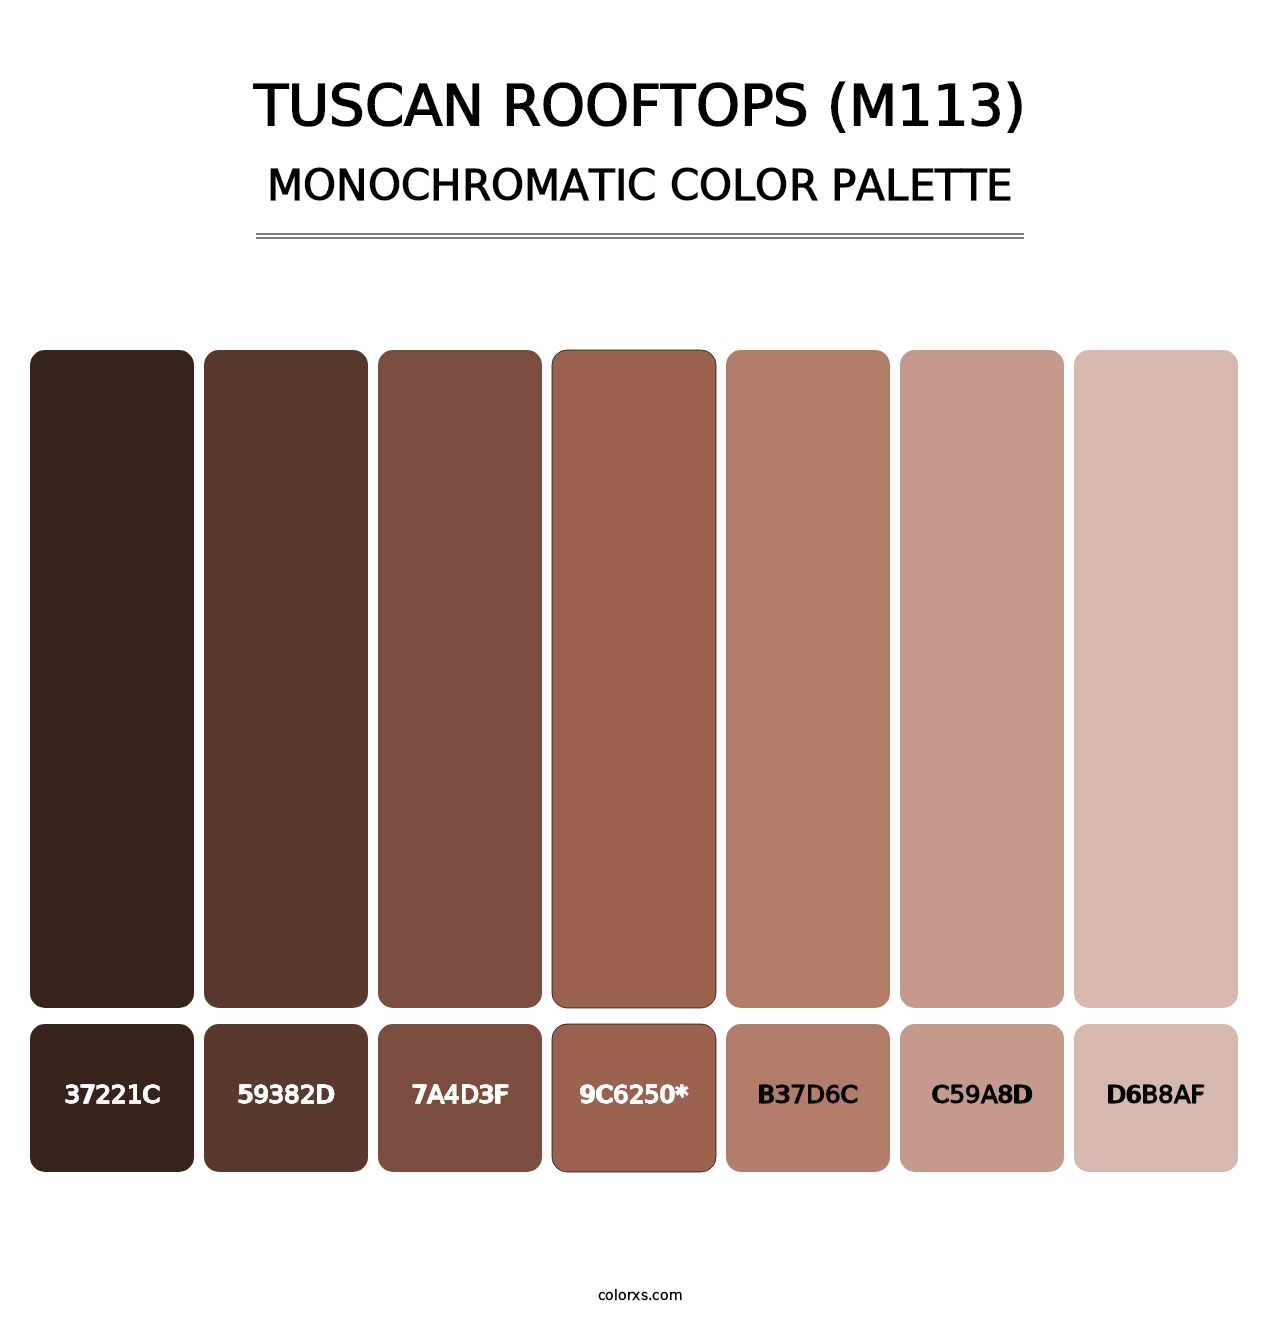 Tuscan Rooftops (M113) - Monochromatic Color Palette